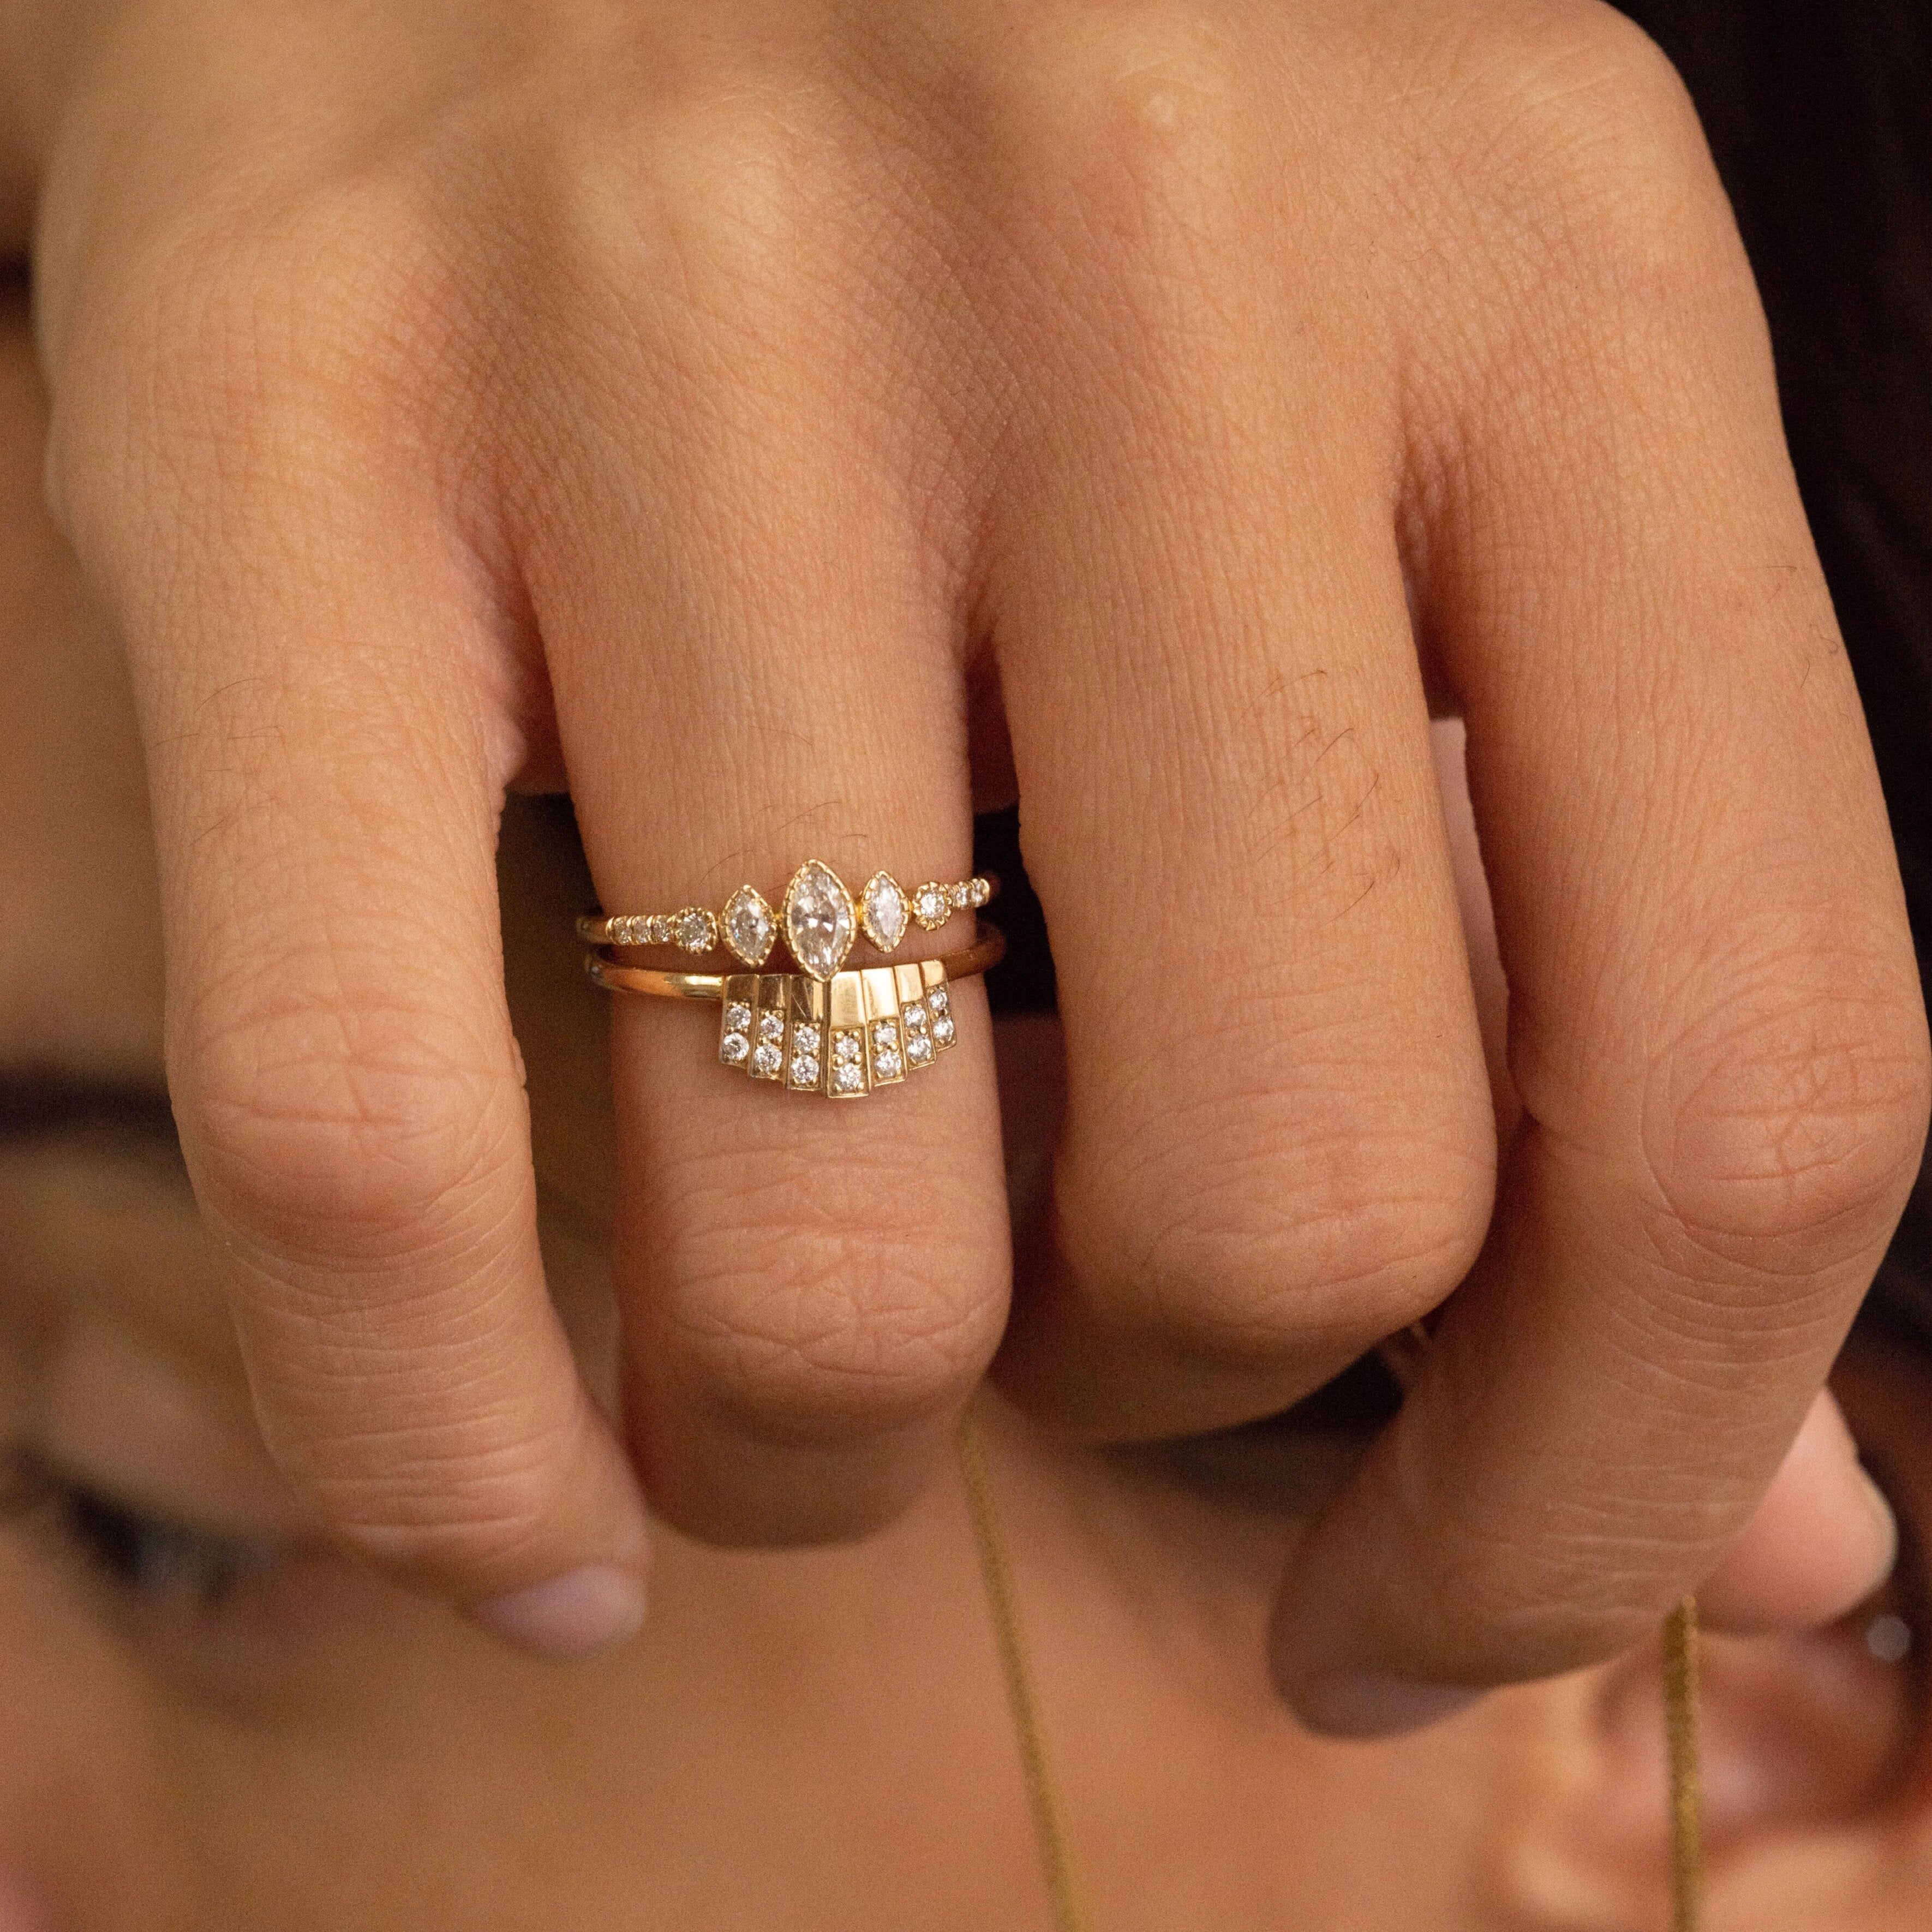 Auto-Inspired Engagement/Wedding Rings Are A Bespoke Way To Say 'I